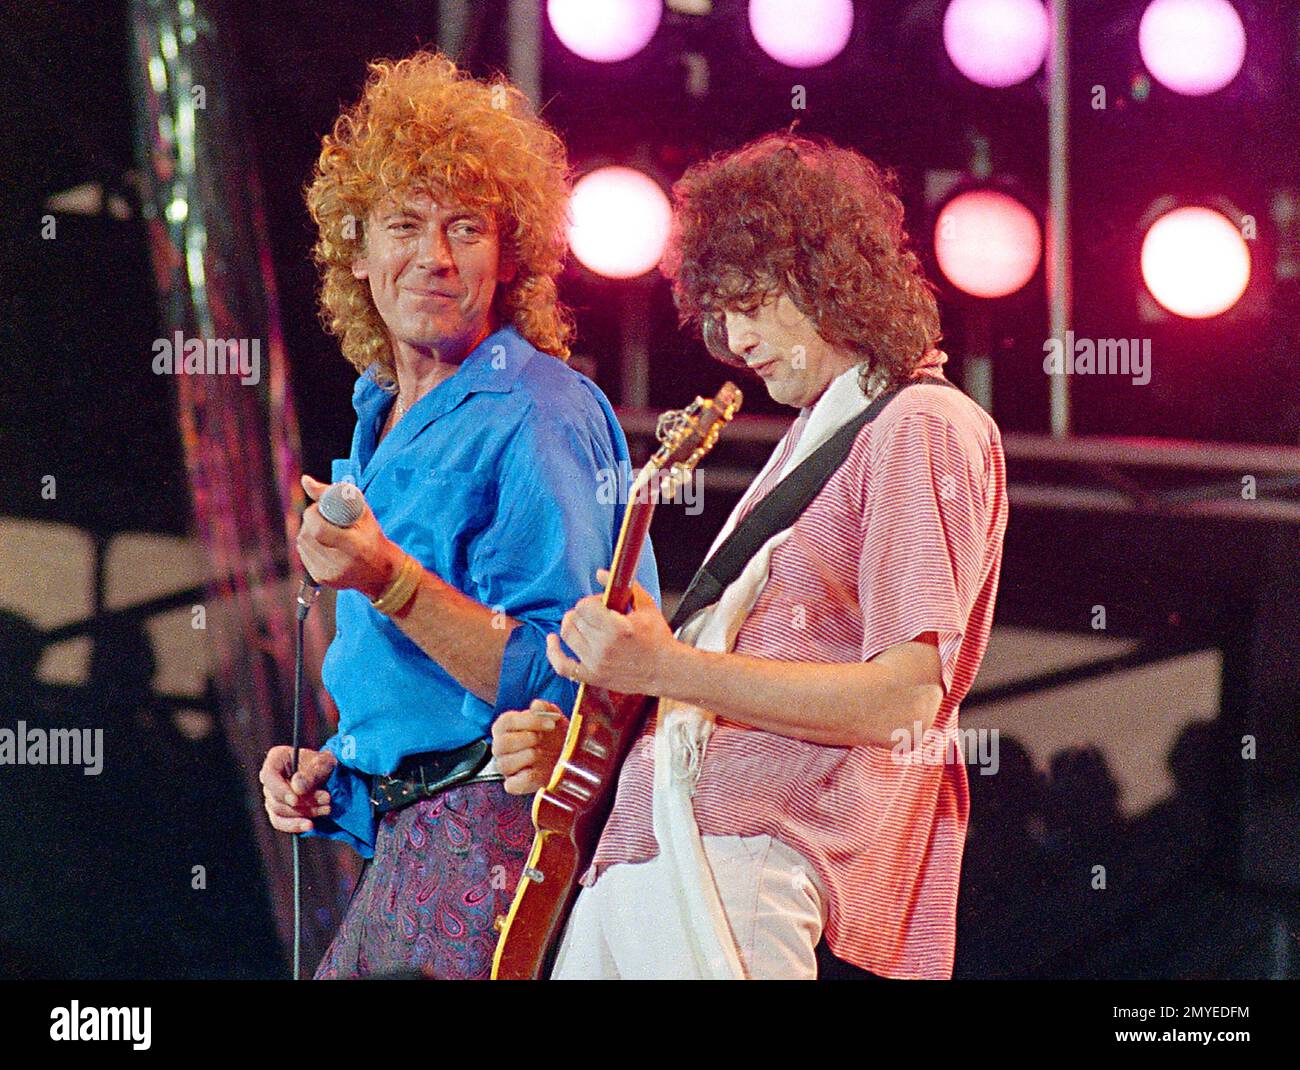 FILE - In this July 13, 1985 file photo, Led Zeppelin bandmates, singer  Robert Plant, left, and guitarist Jimmy Page, reunite to perform for the  Live Aid famine relief concert at JFK